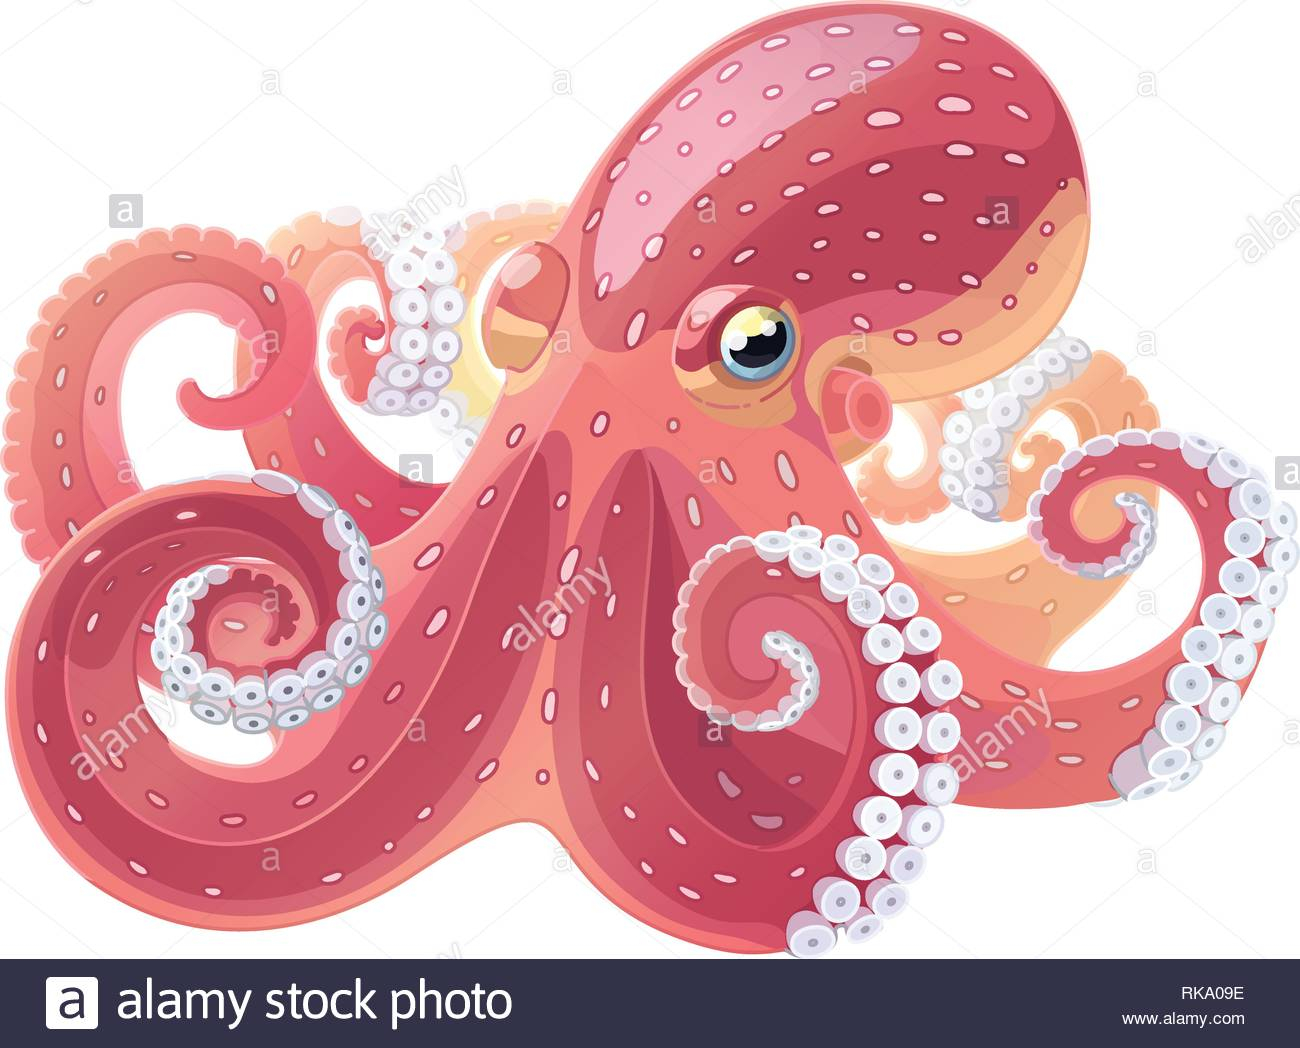 octopus clipart printable